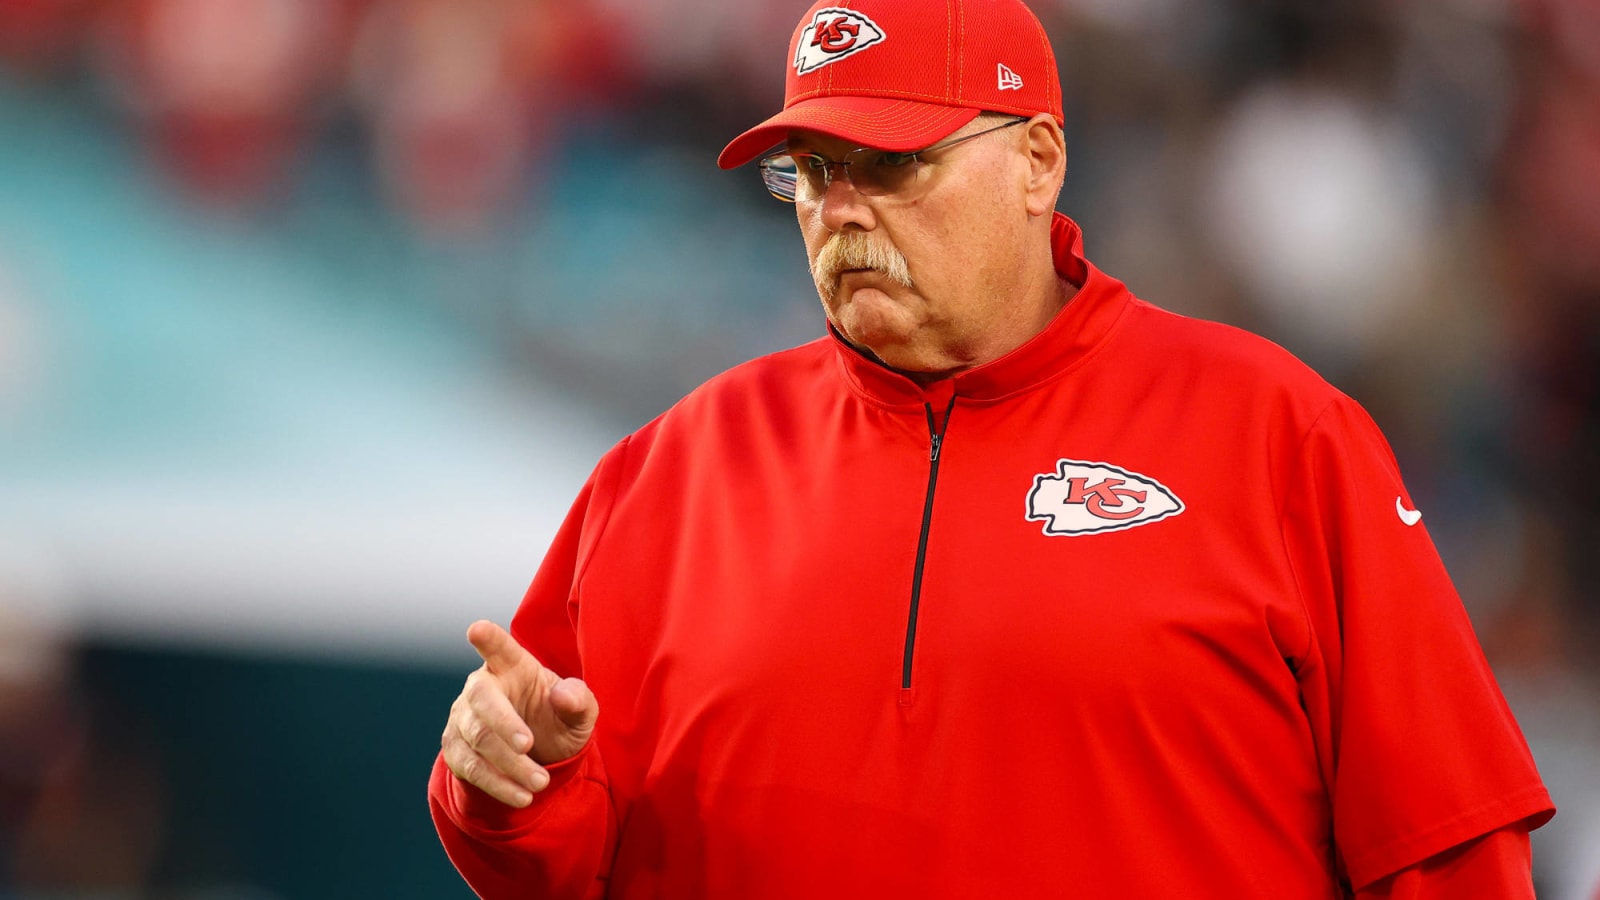 Ranking the head coaches for the 2020 NFL season